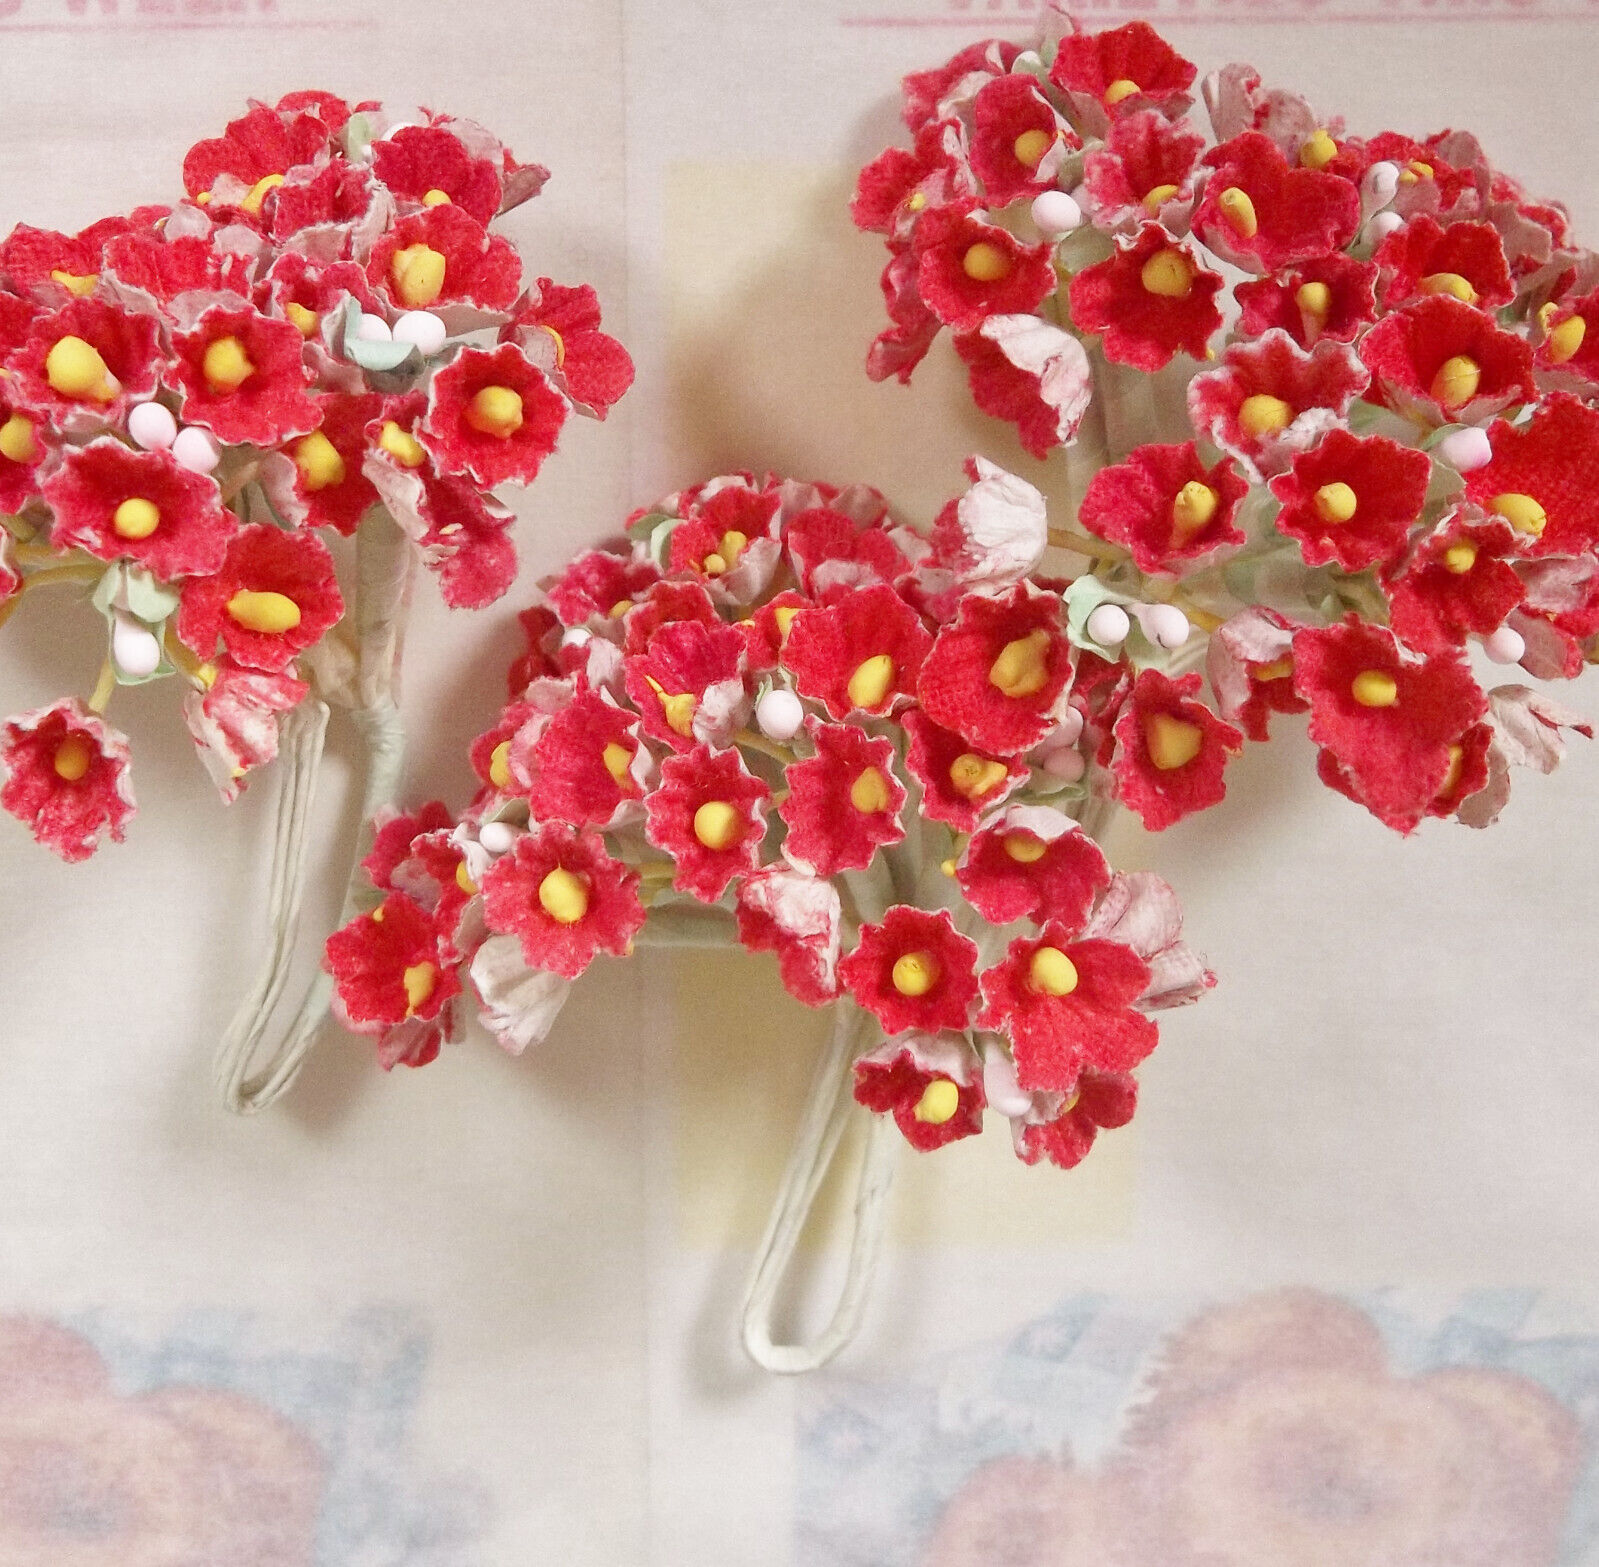 Vintage Millinery Flowers / Forget Me Nots / Red Artificial Flowers / DIY Crafts